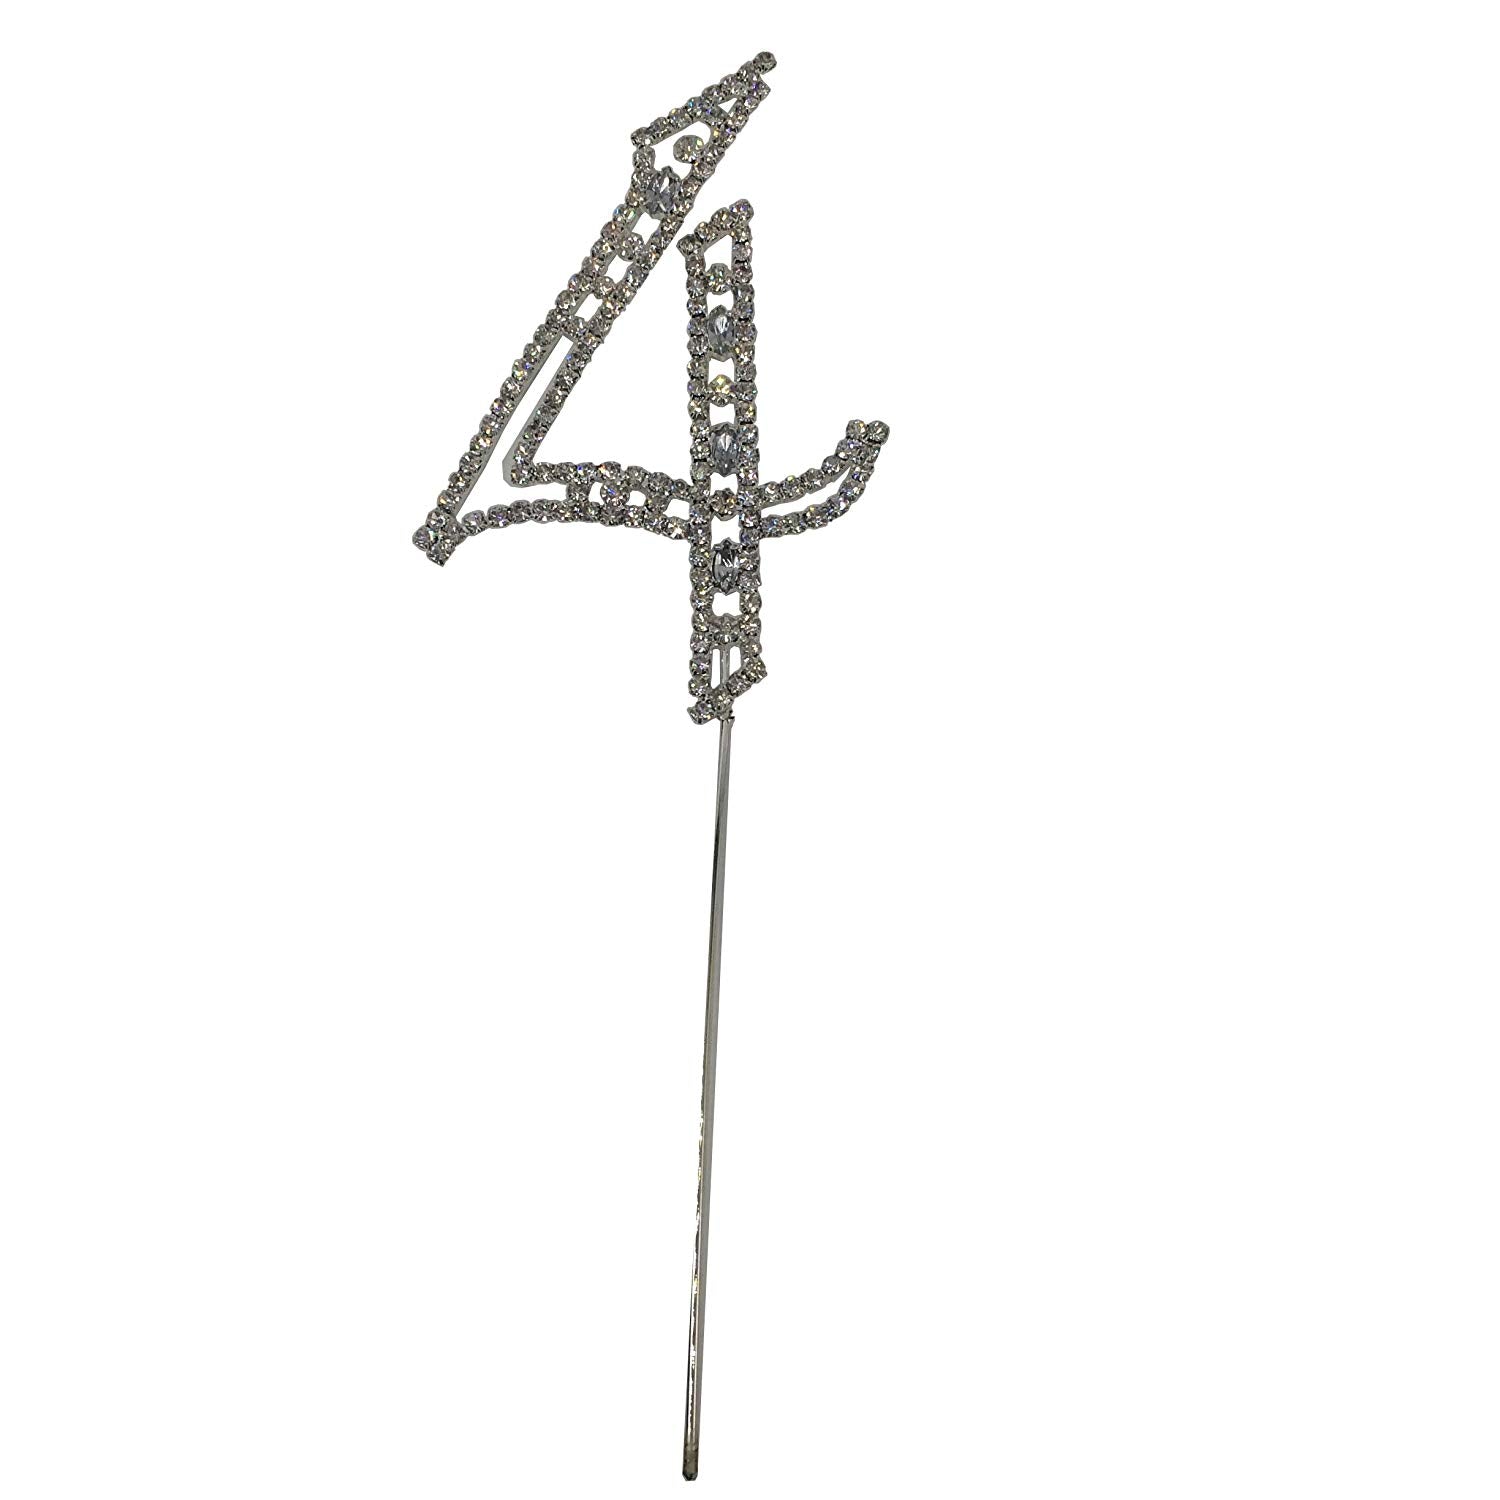 Large Number 4 Diamante Aniversary Wedding Party Cake Topper Pick 8-inch